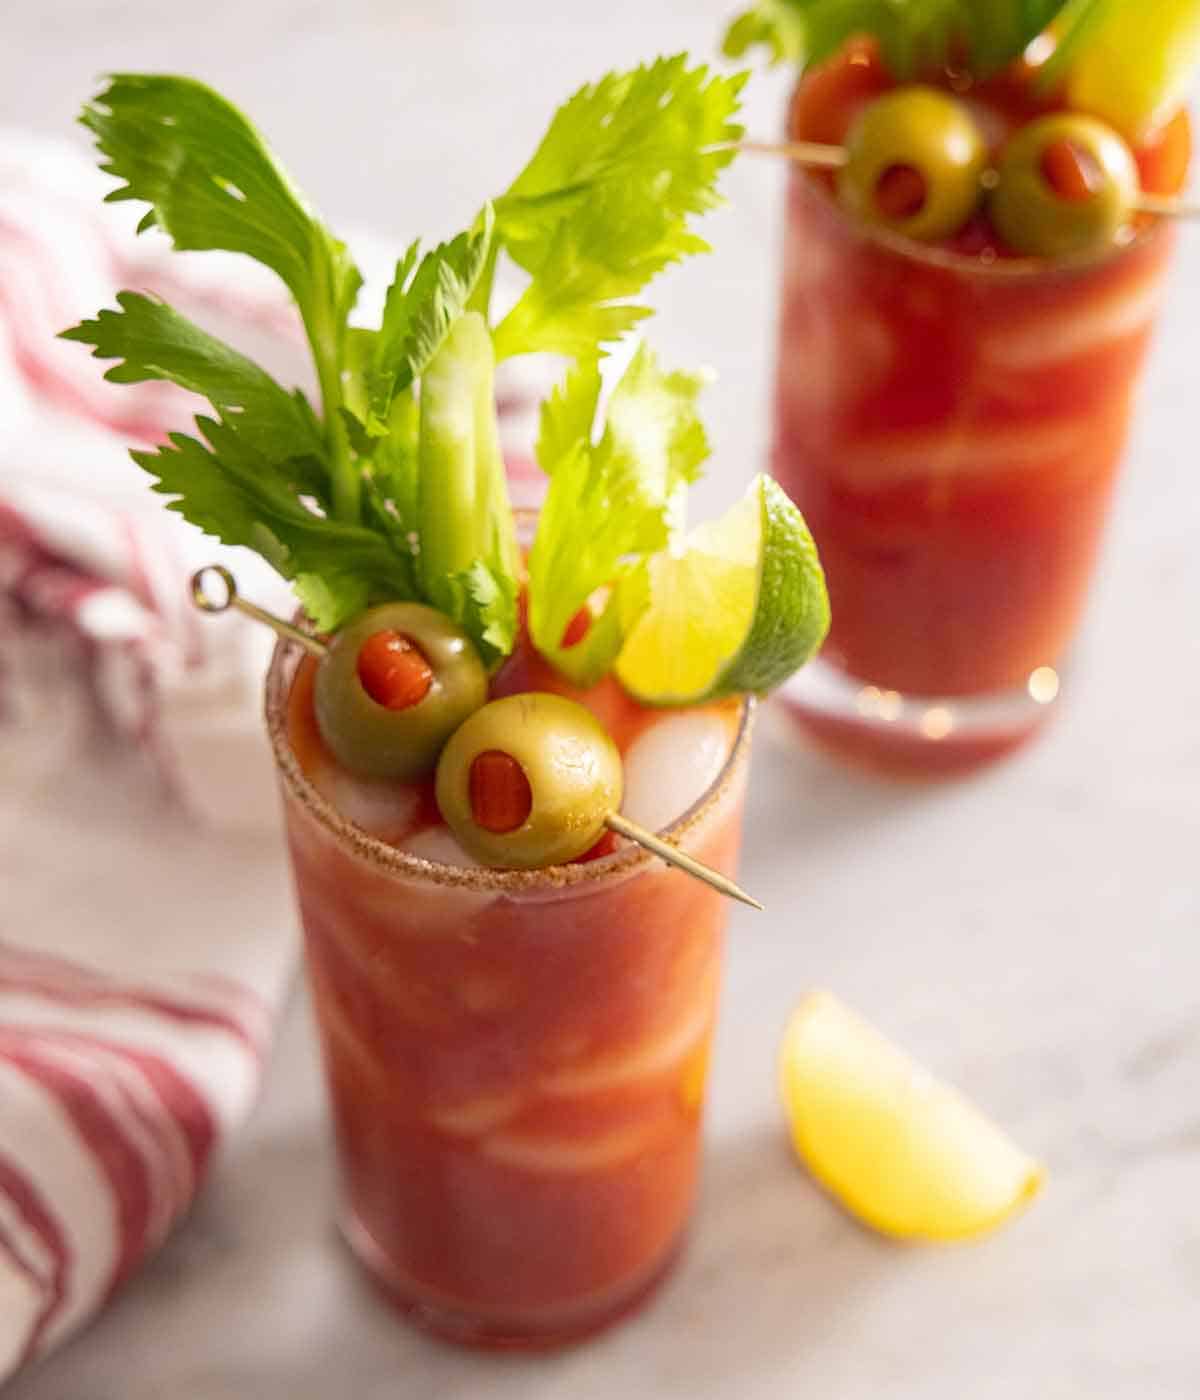 Angled few showing the Bloody Mary's garnishes - olives, lime, and celery.